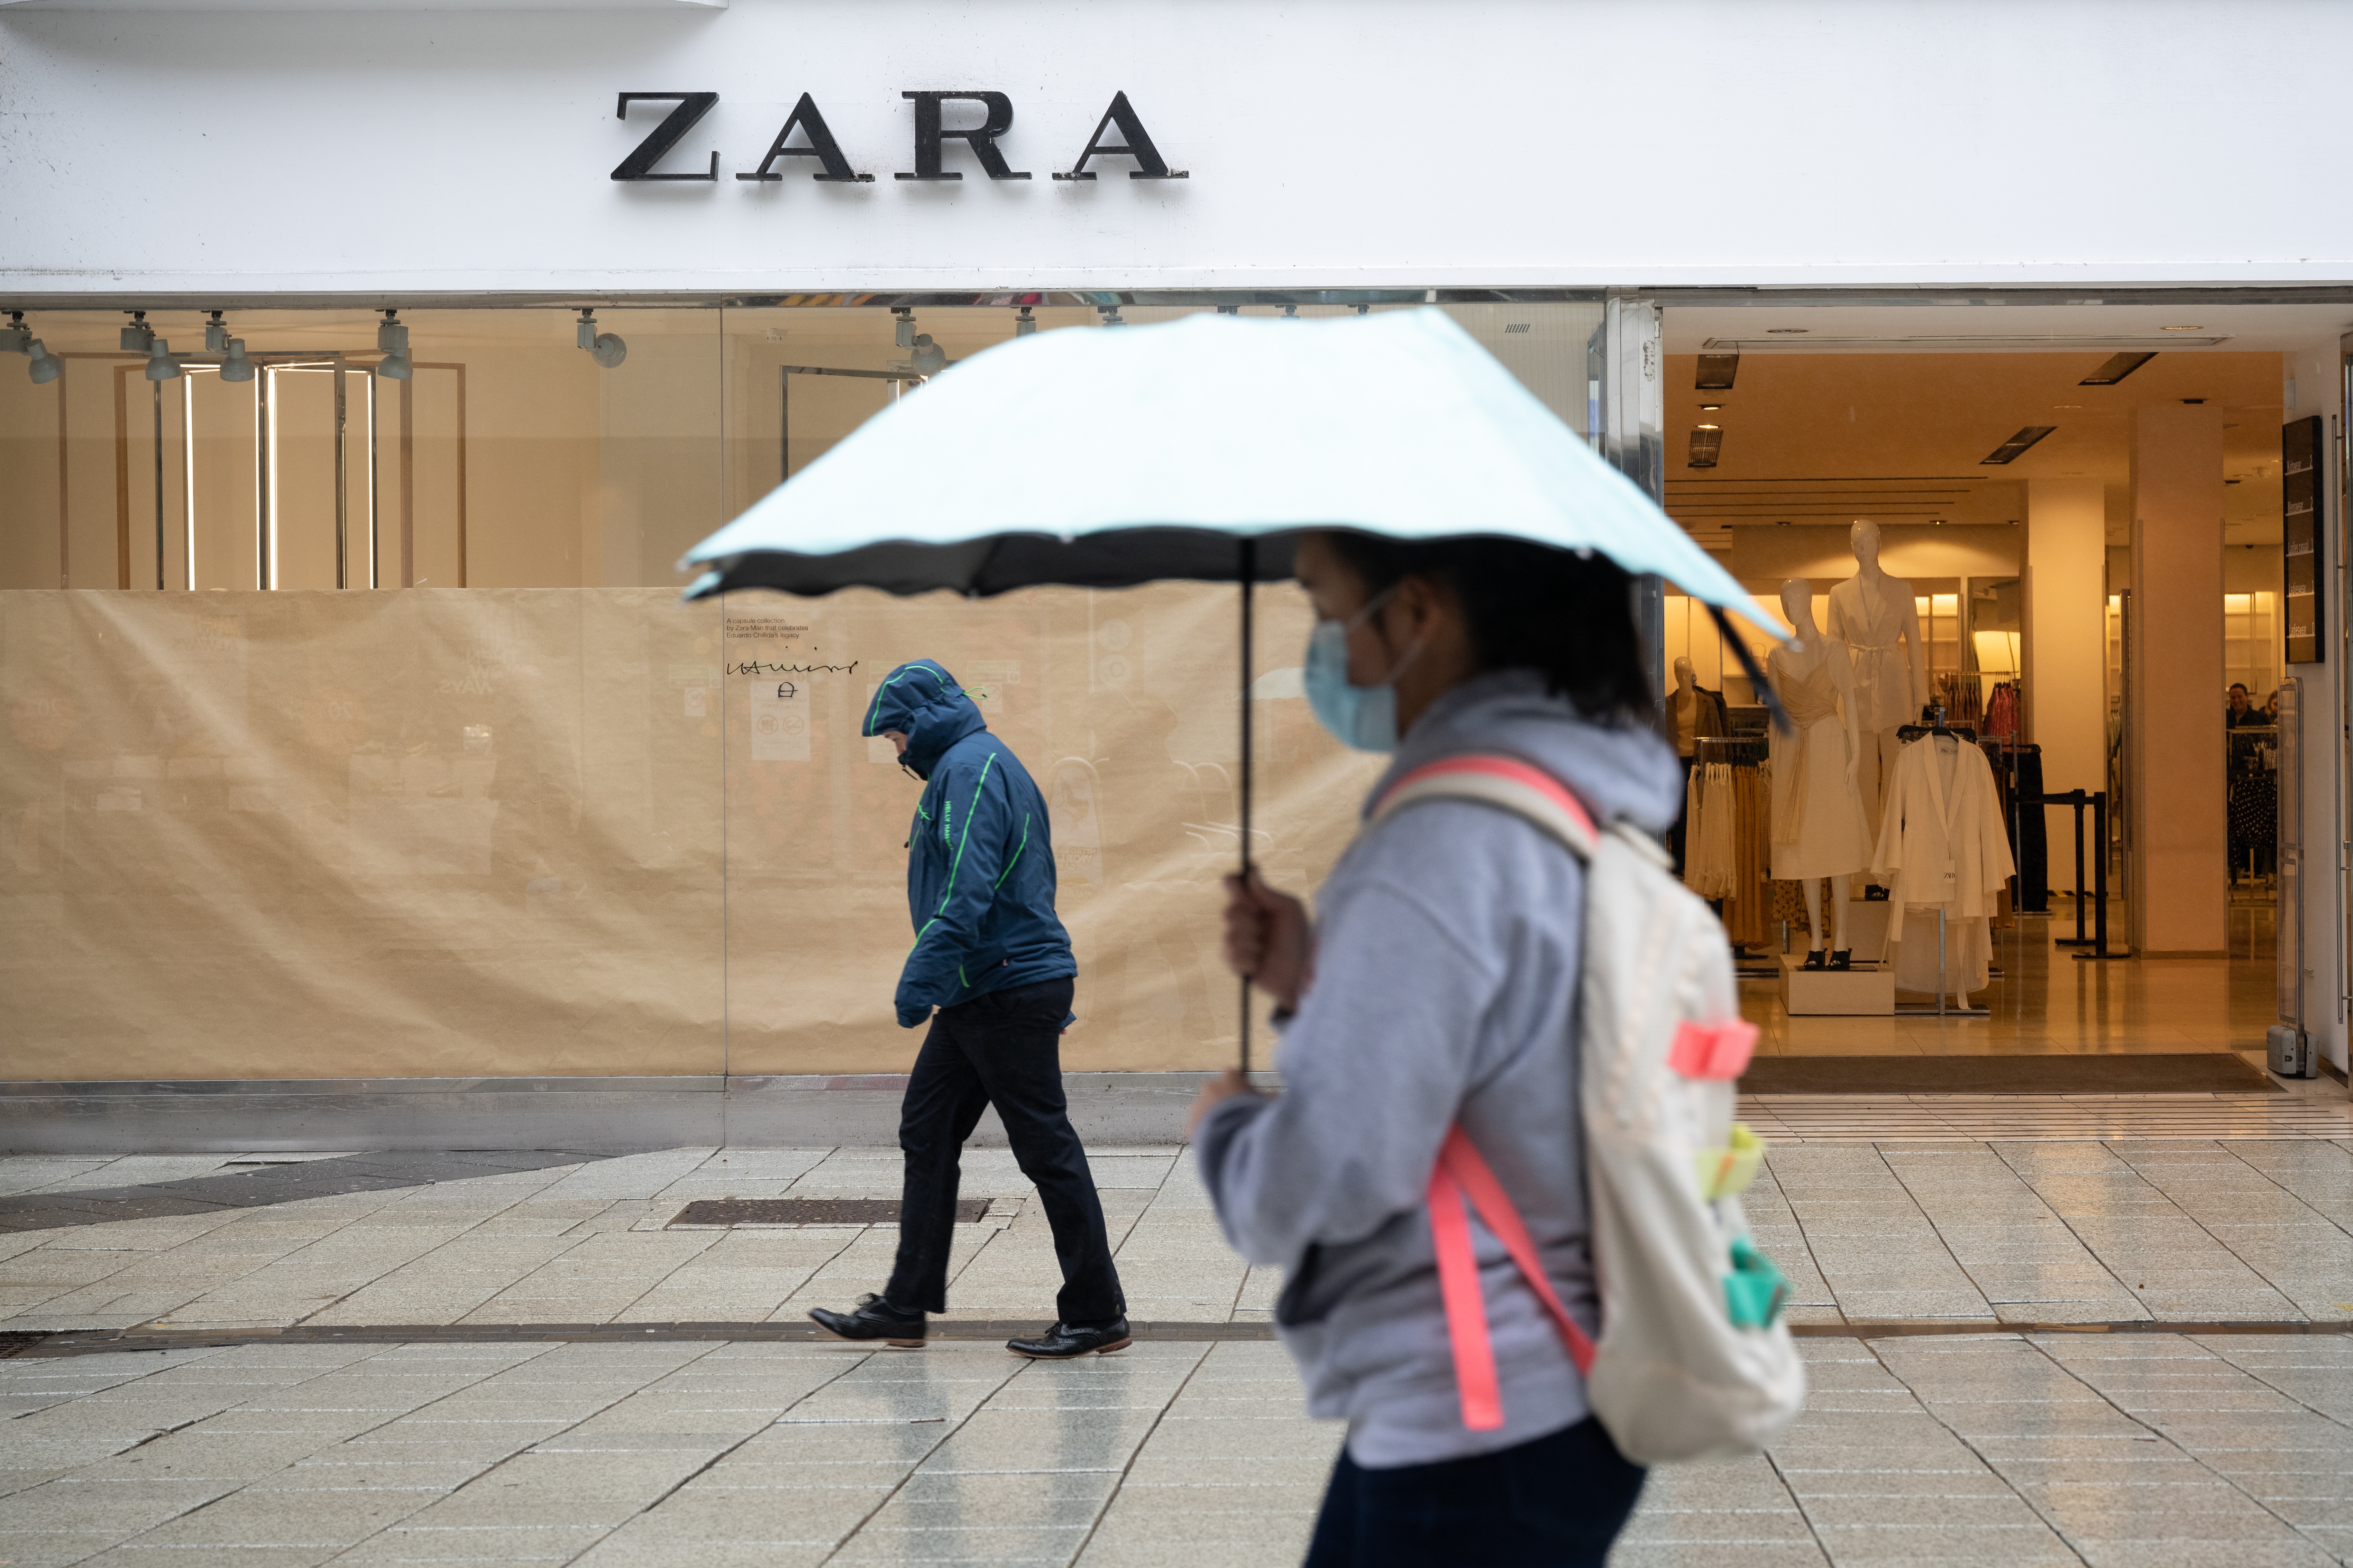 CARDIFF, UNITED KINGDOM - MARCH 18: A general view of fashion retailer Zara in central Cardiff on March 18, 2020 in Cardiff, United Kingdom. The fashion retailer Zara has announced it is to temporarily close 3785 stores due to the coronavirus outbreak cau (Foto: Getty Images)